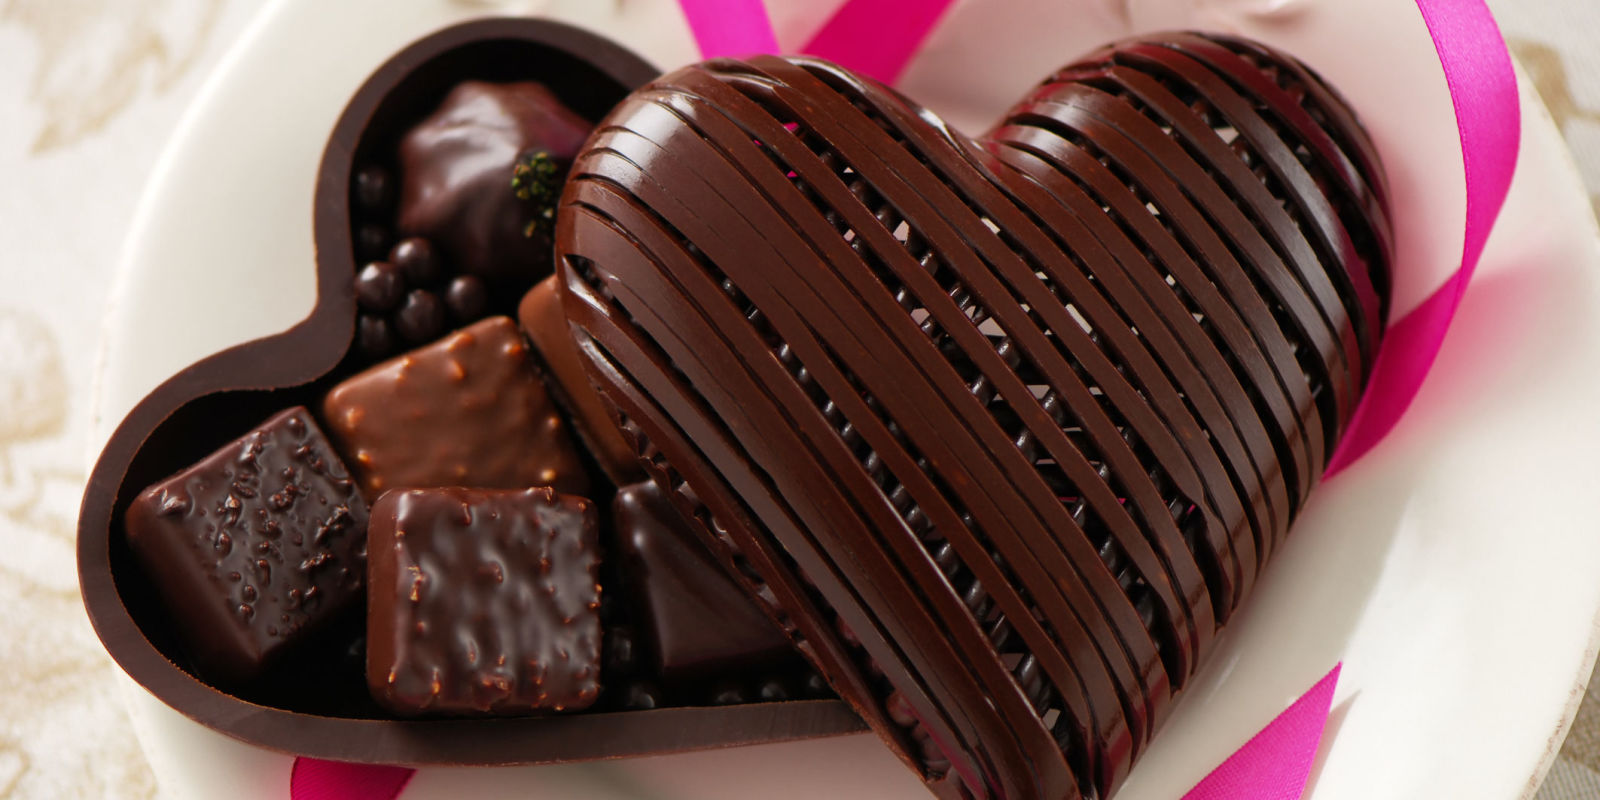 Top 5 Most Popular Brands of Chocolates In India